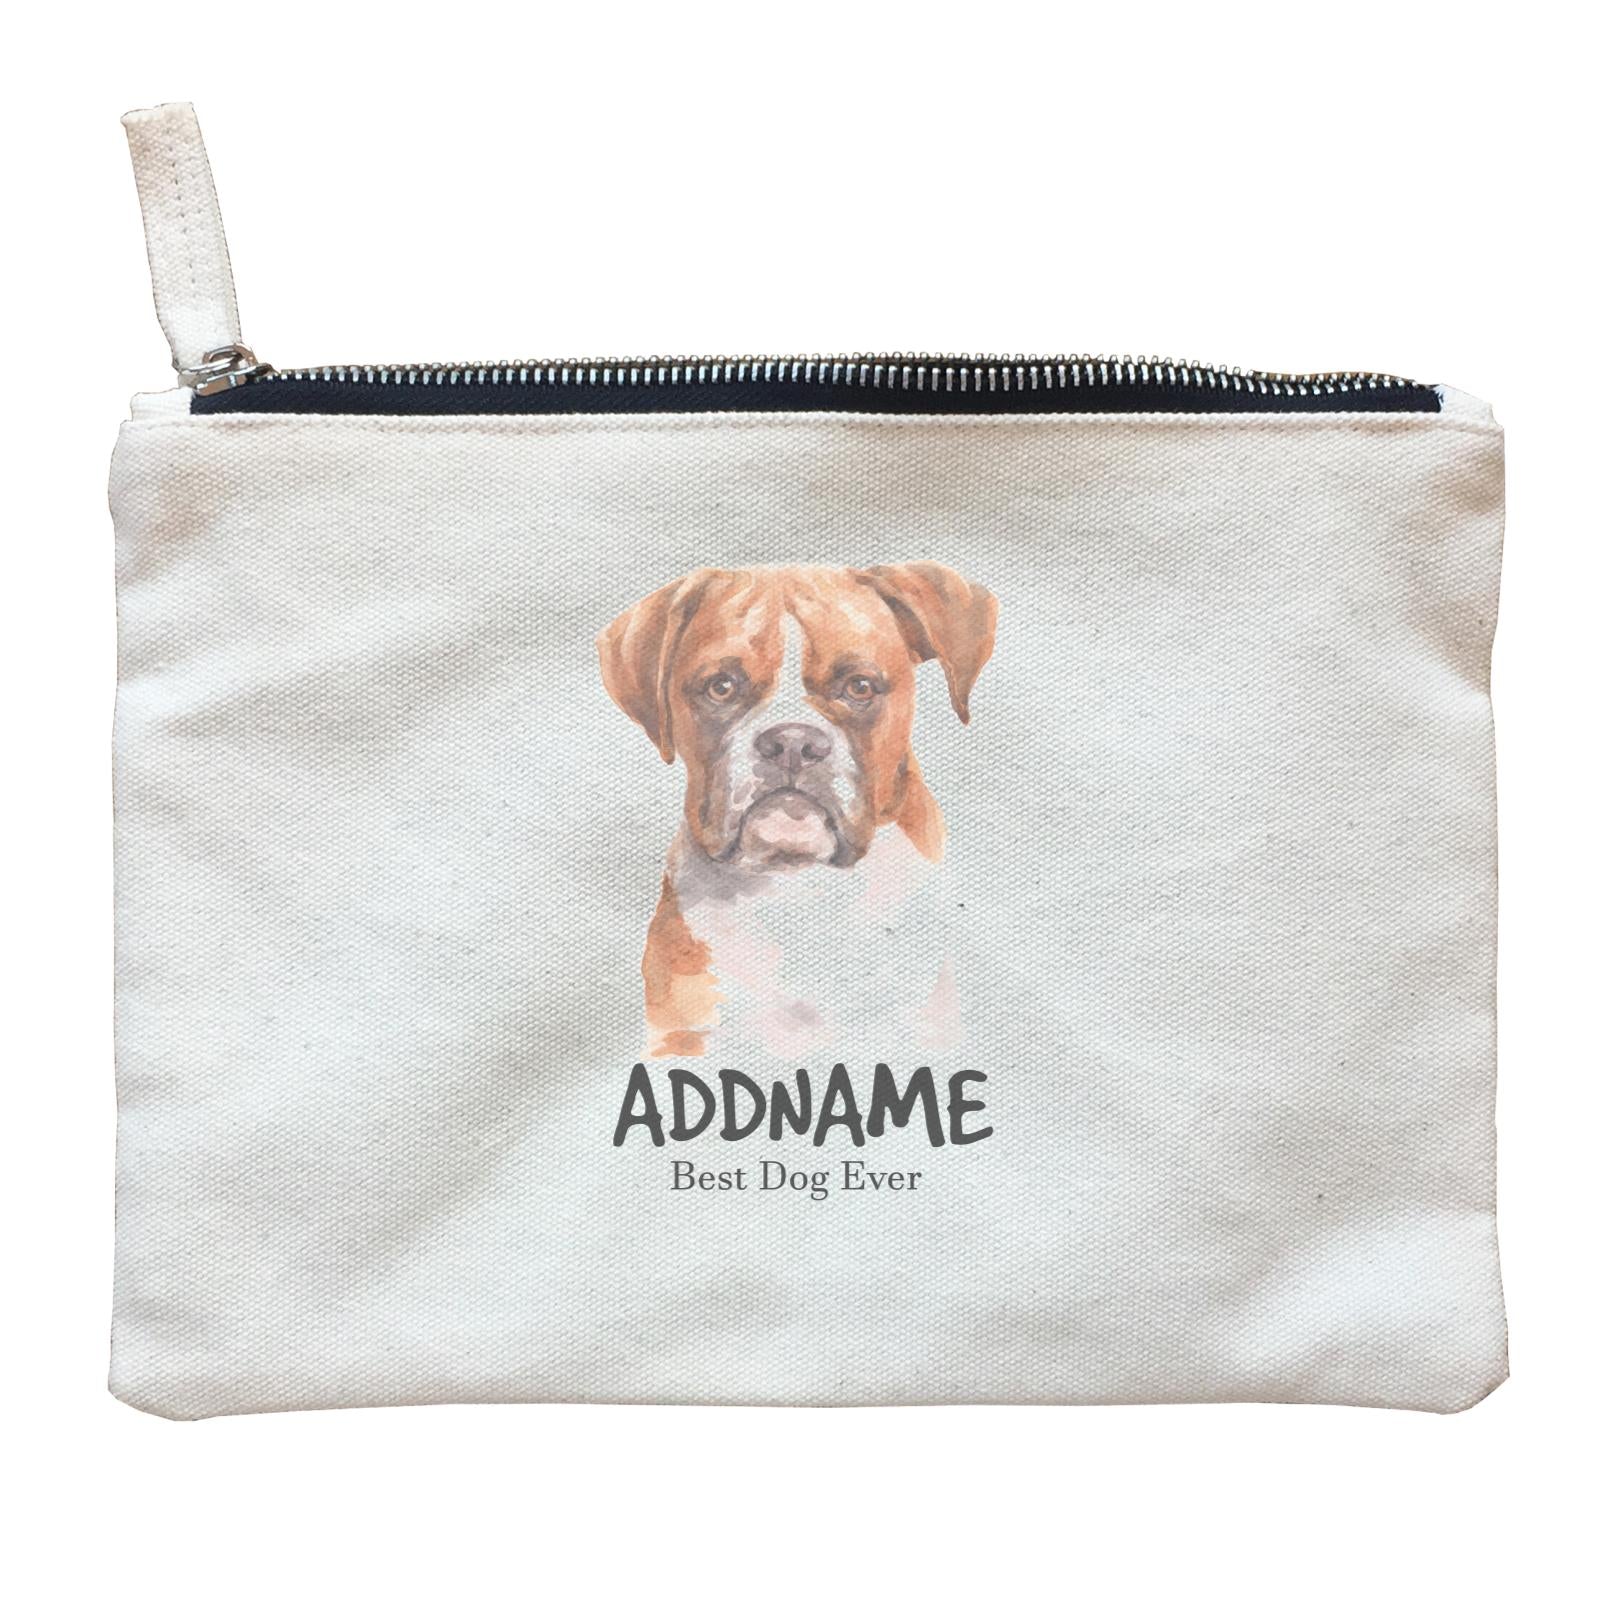 Watercolor Dog Boxer Brown Ears Best Dog Ever Addname Zipper Pouch